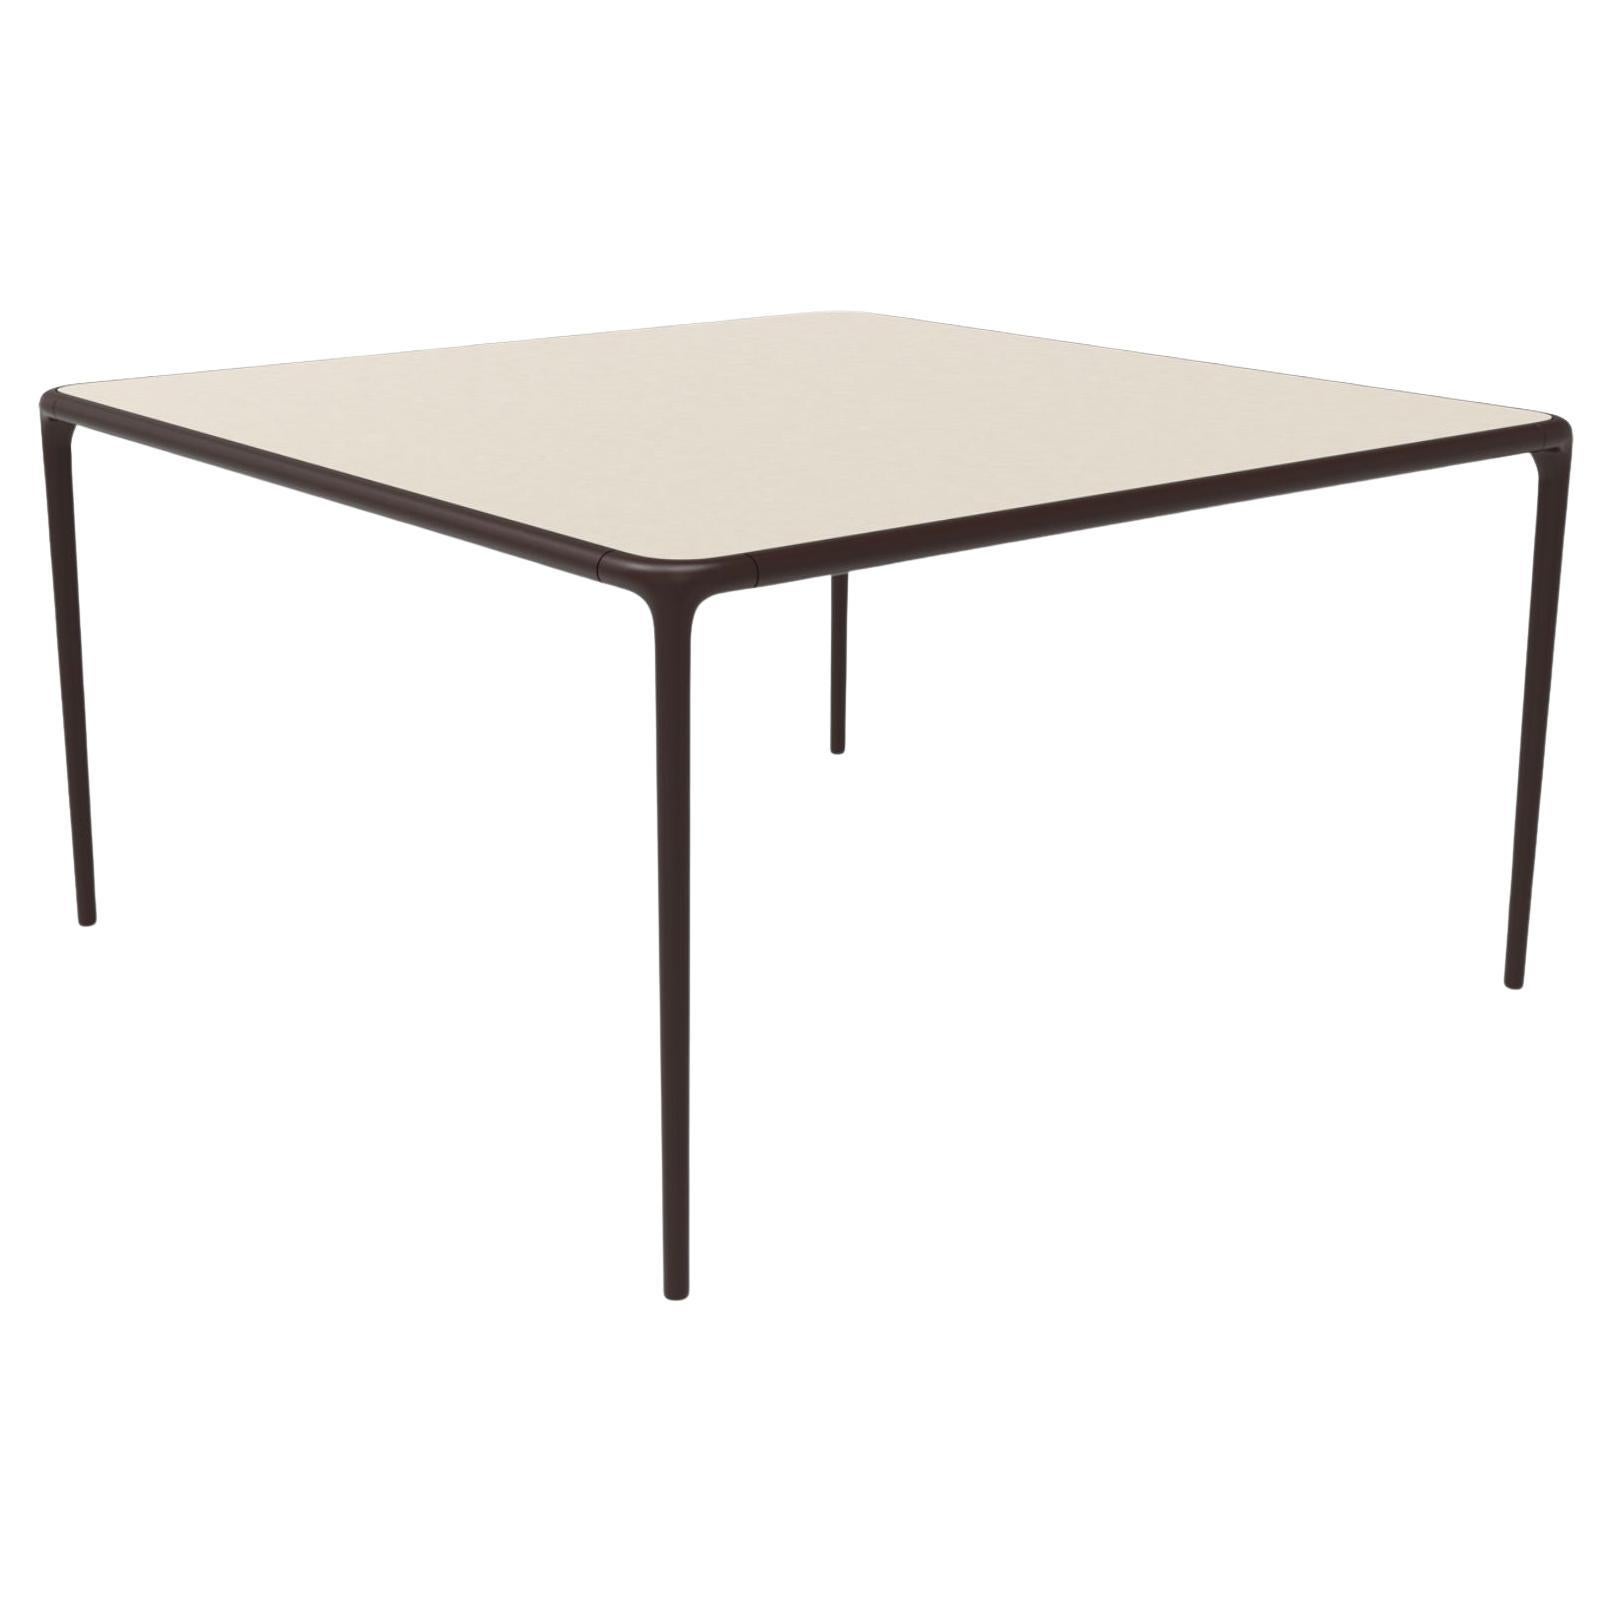 Xaloc Chocolate Glass Top Table 140 by Mowee For Sale